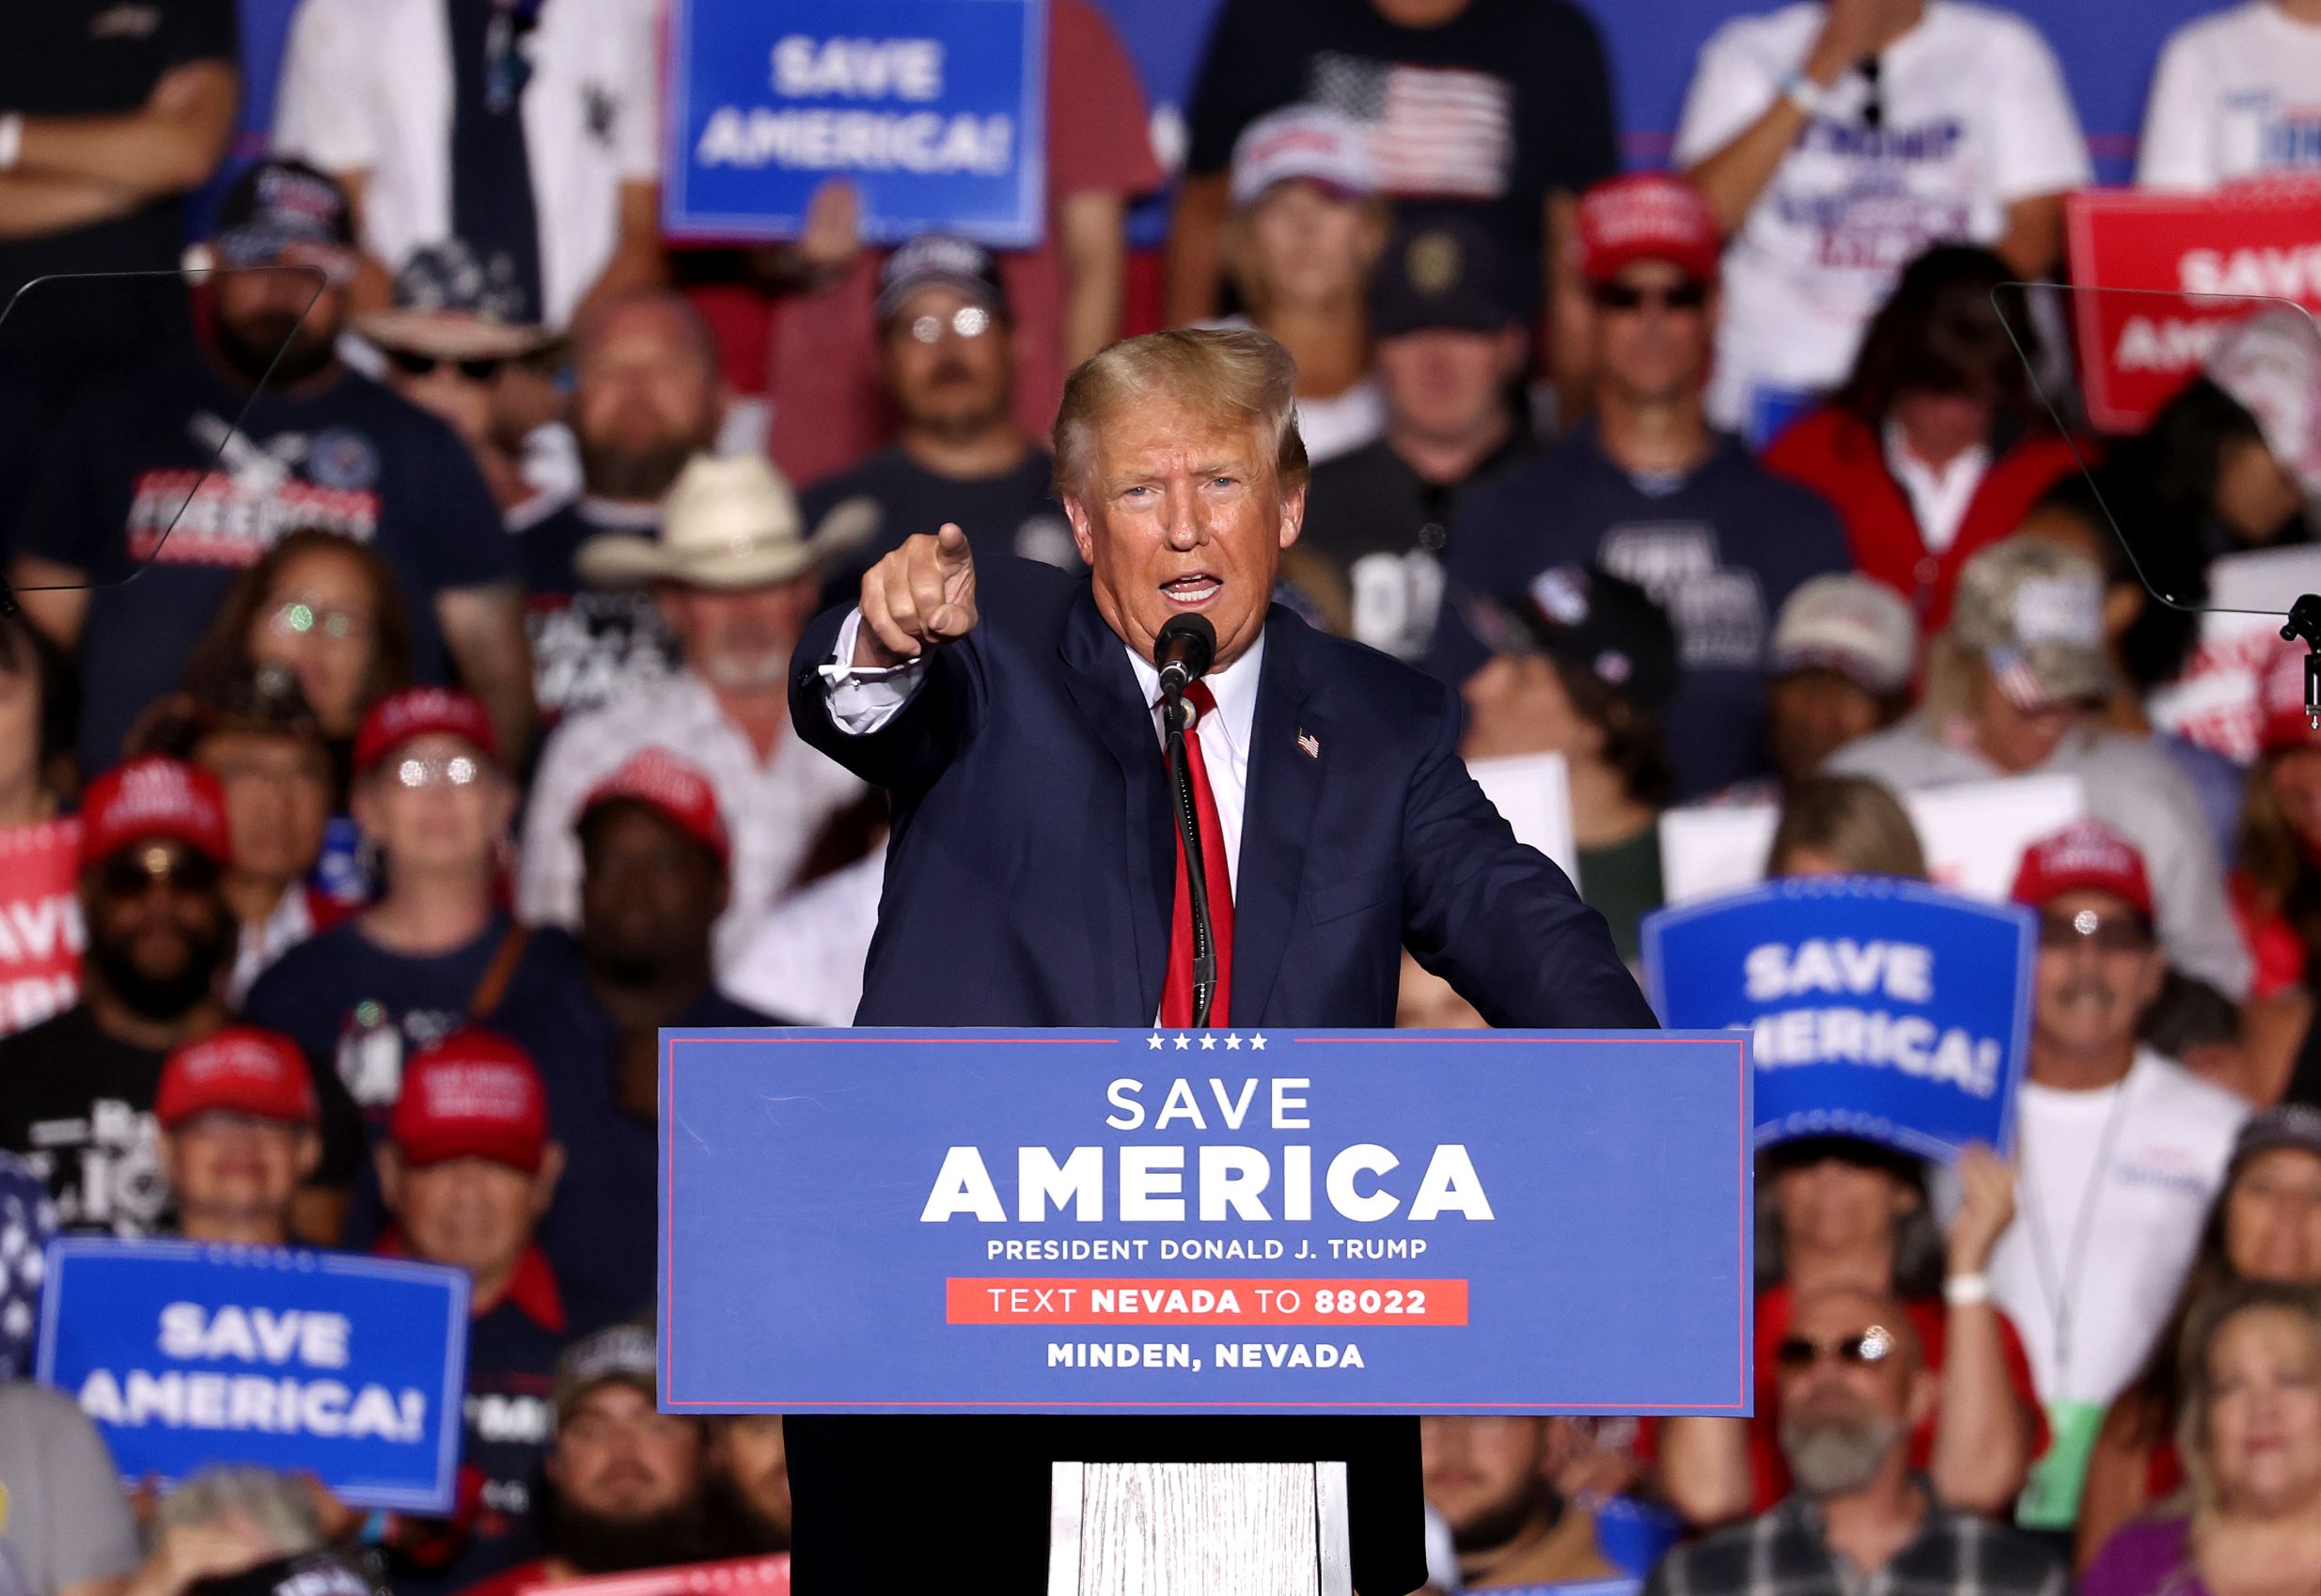 Trump to Hold Rallies in 4 States Ahead of Midterm Elections